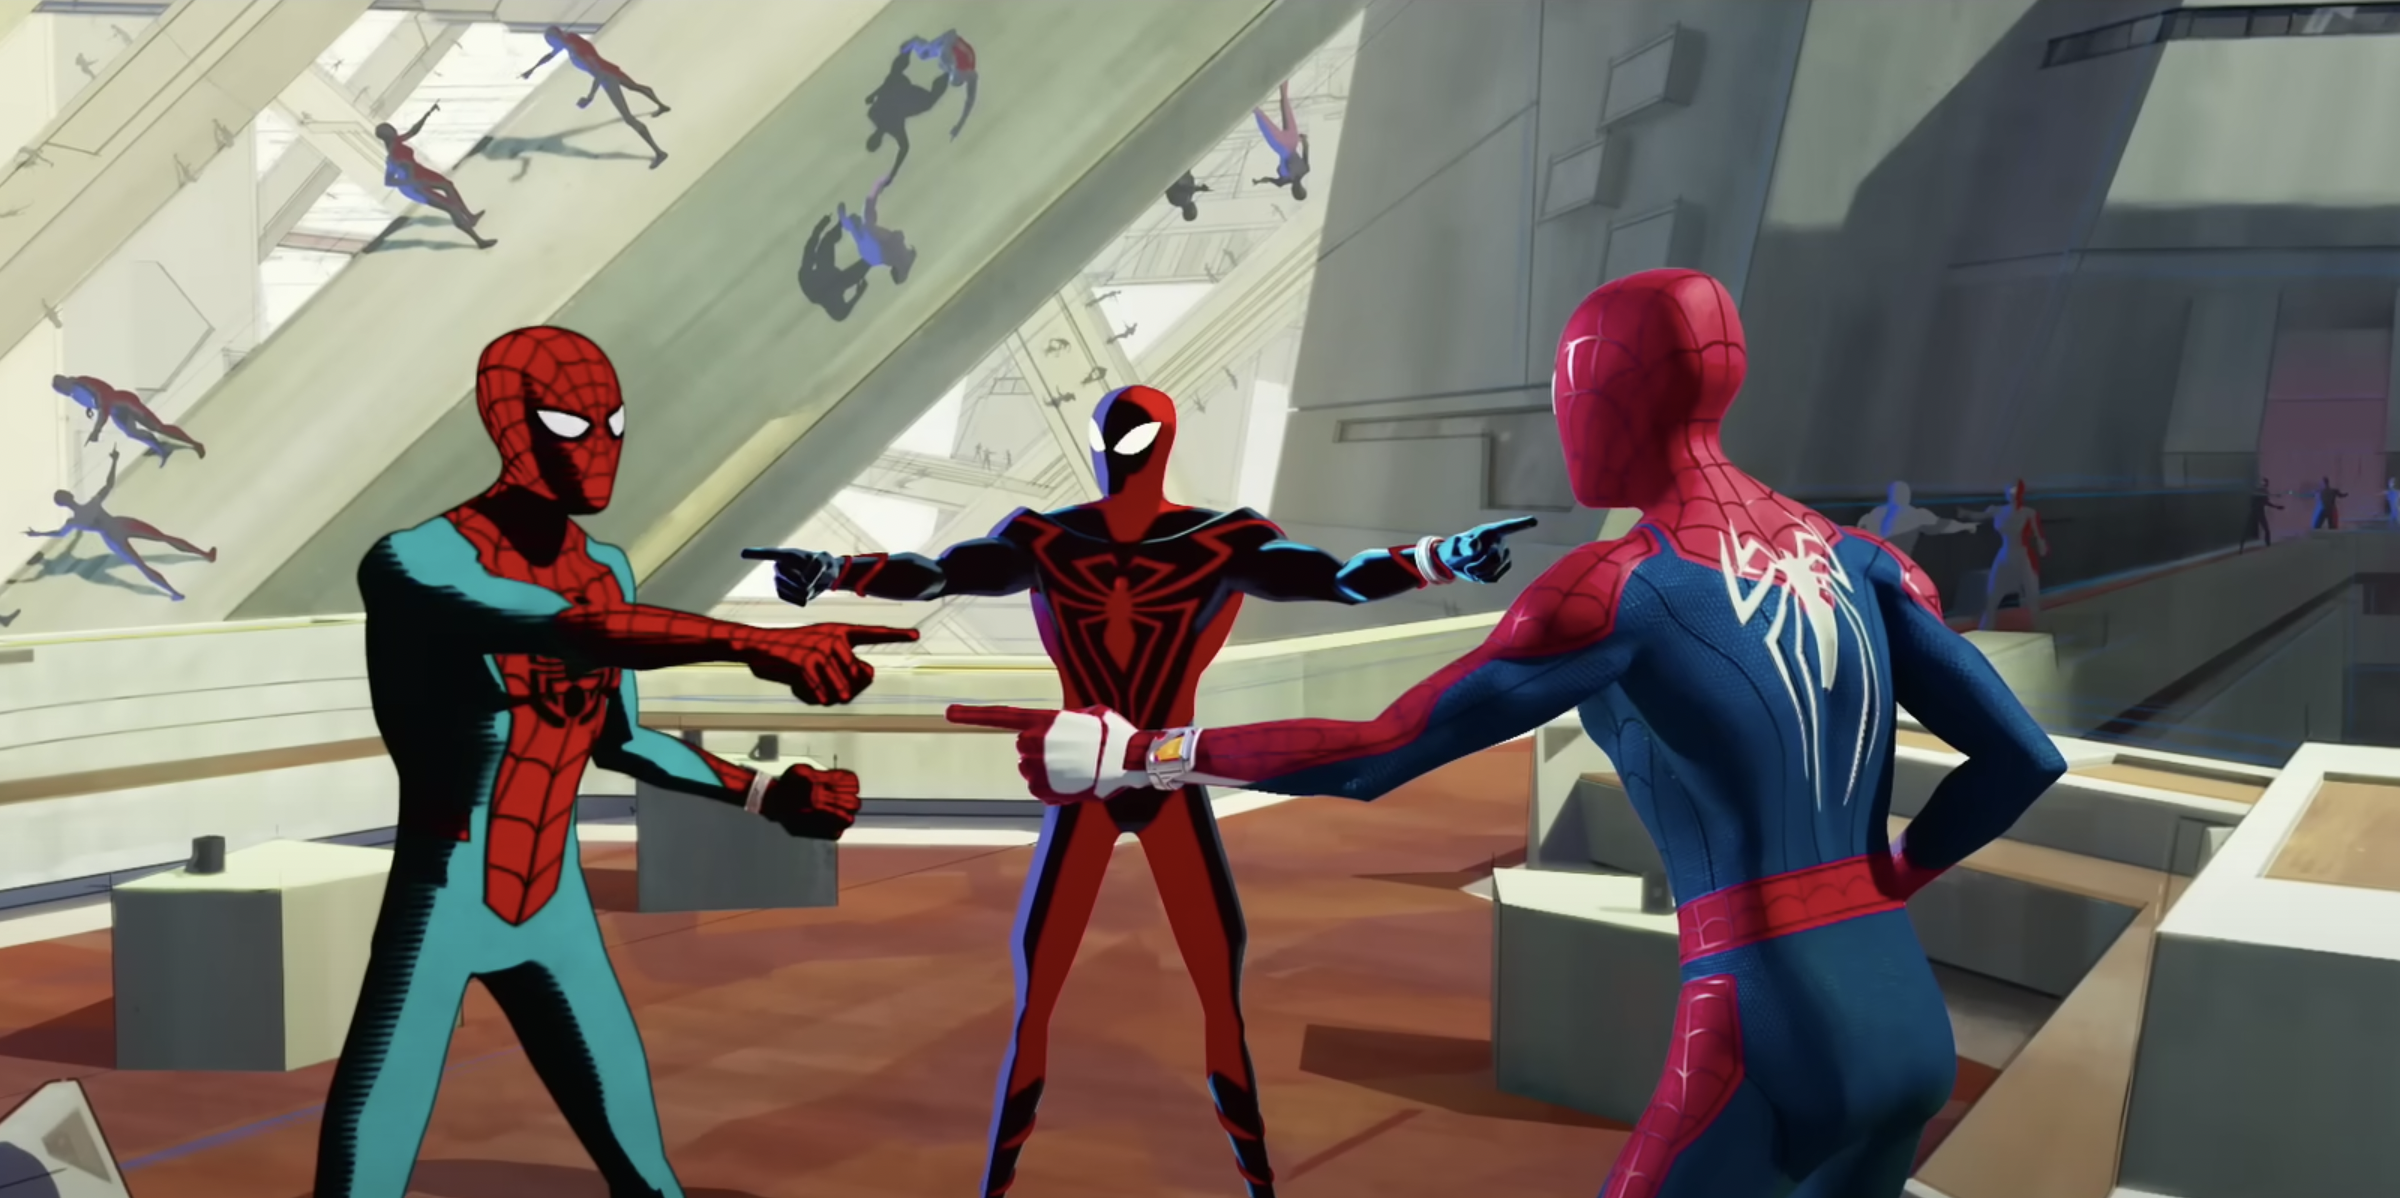 Spider-Man: Across the Spider-Verse swings onto Netflix very soon